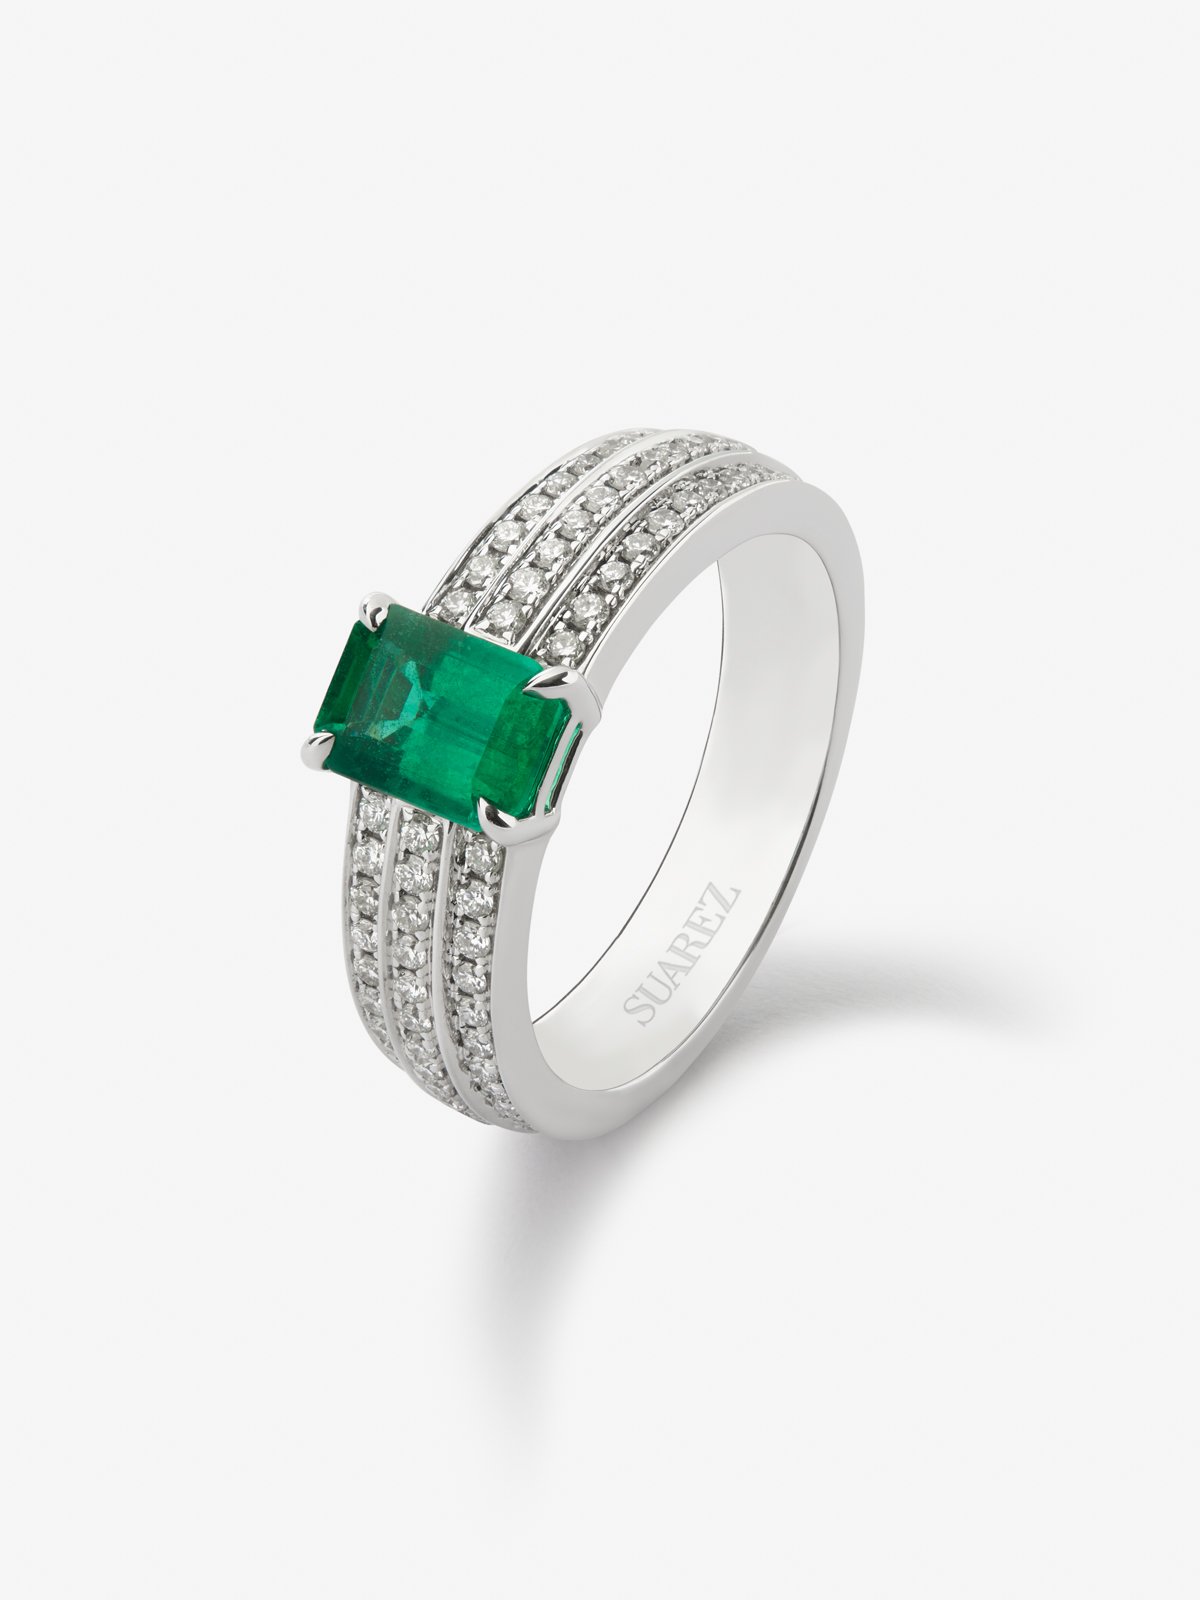 18K white gold ring with octagonal cut emerald of 1,114 cts and 68 brilliant cut diamonds with a total of 0.37 cts